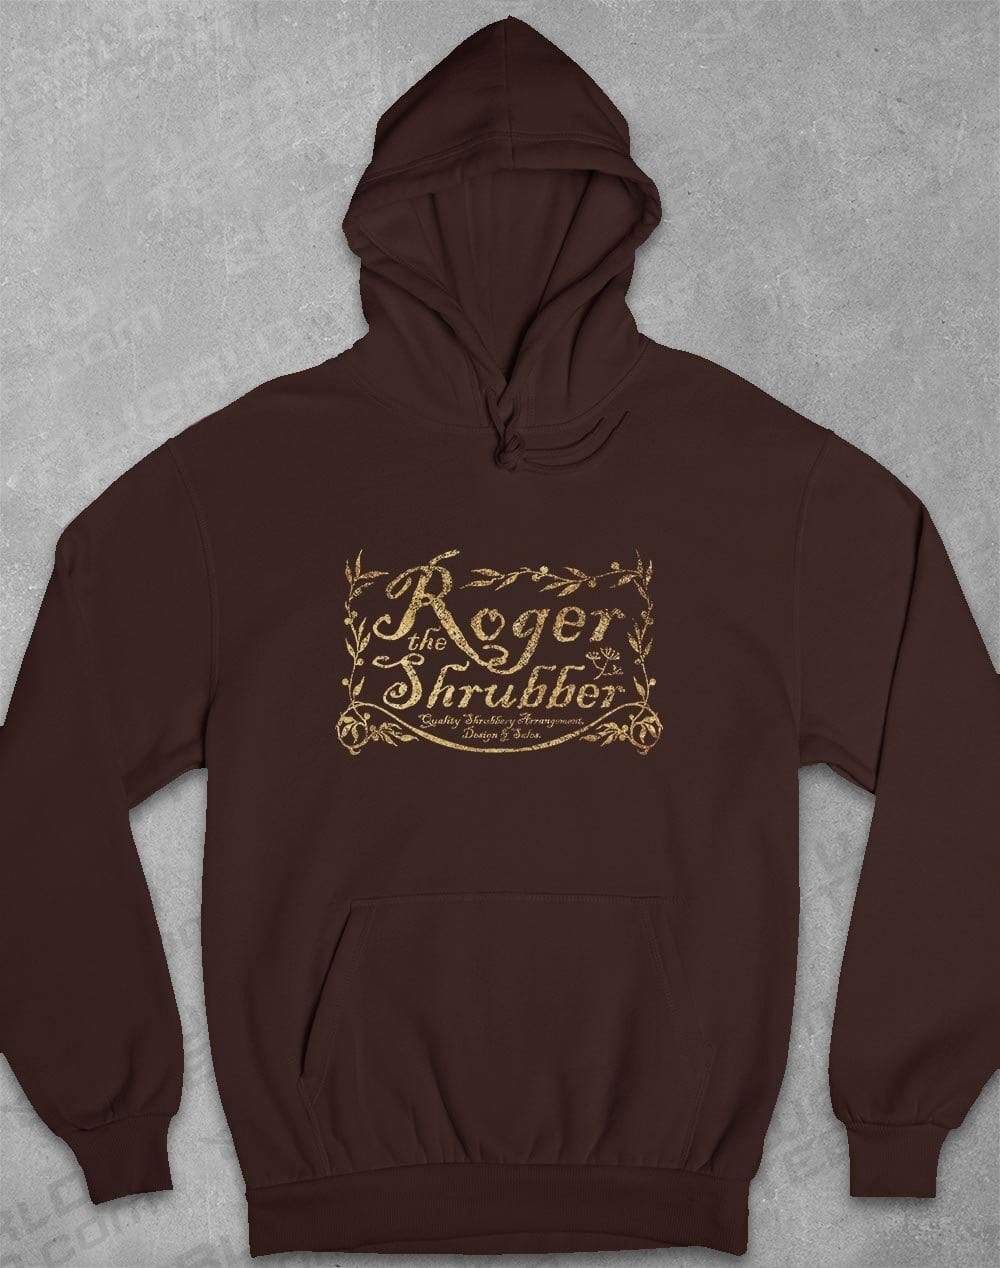 Roger the Shrubber Hoodie S / Hot Chocolate  - Off World Tees